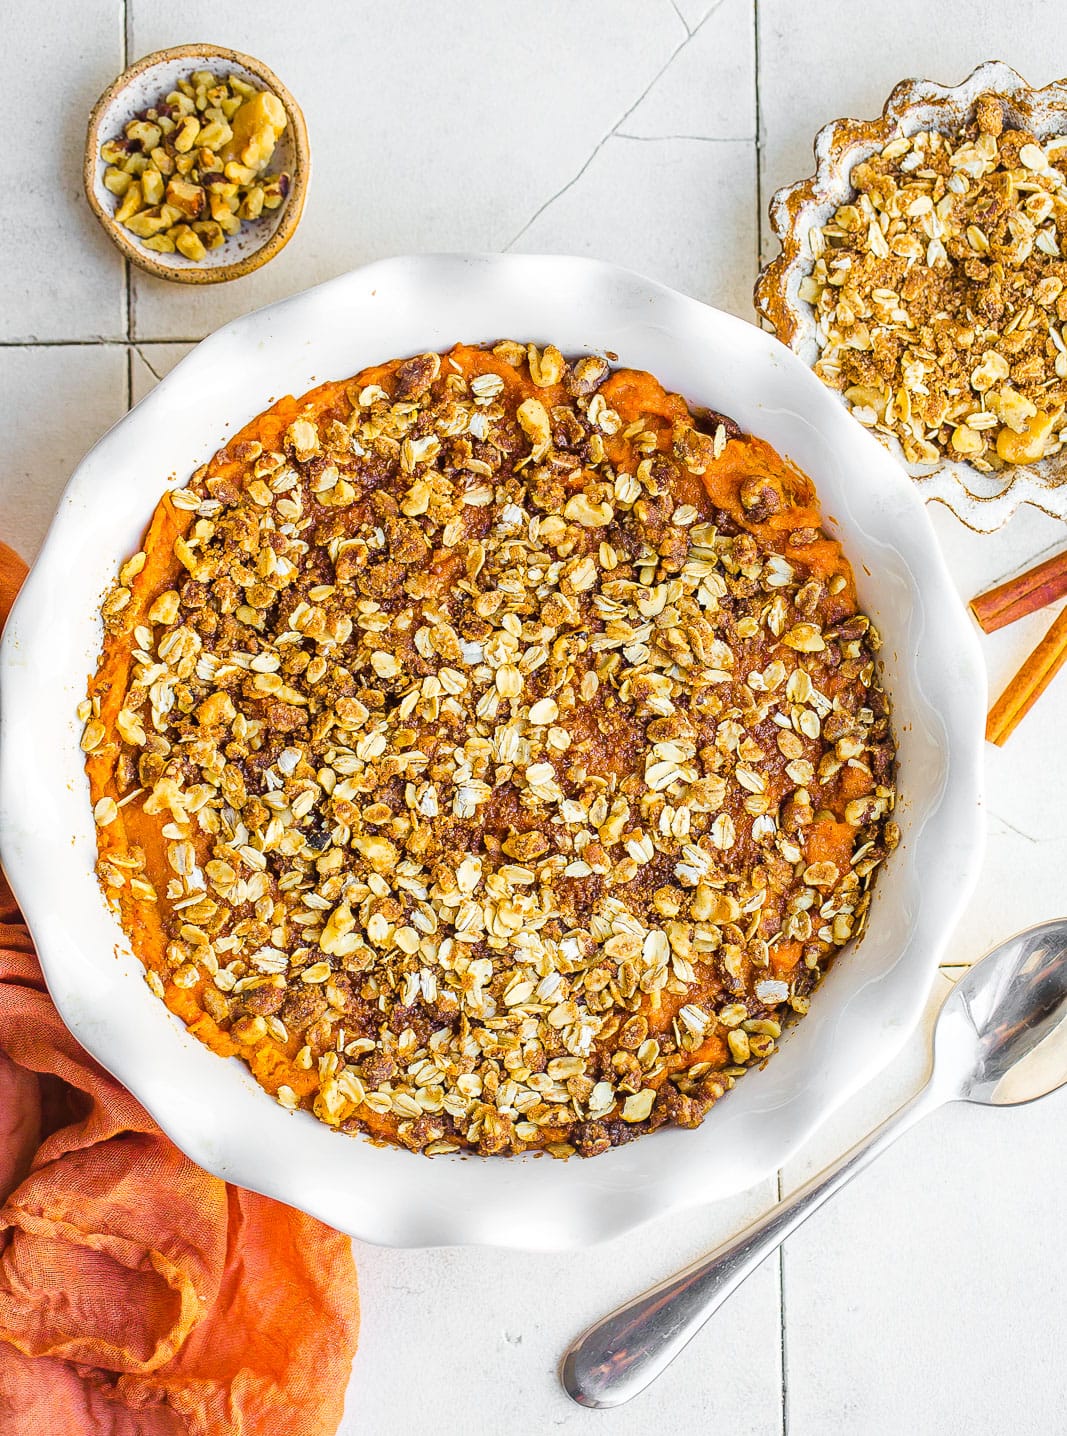 Birdseye view of sweet potato casserole recipe with oat crumble topping, cinnamons stick, and serving spoon.